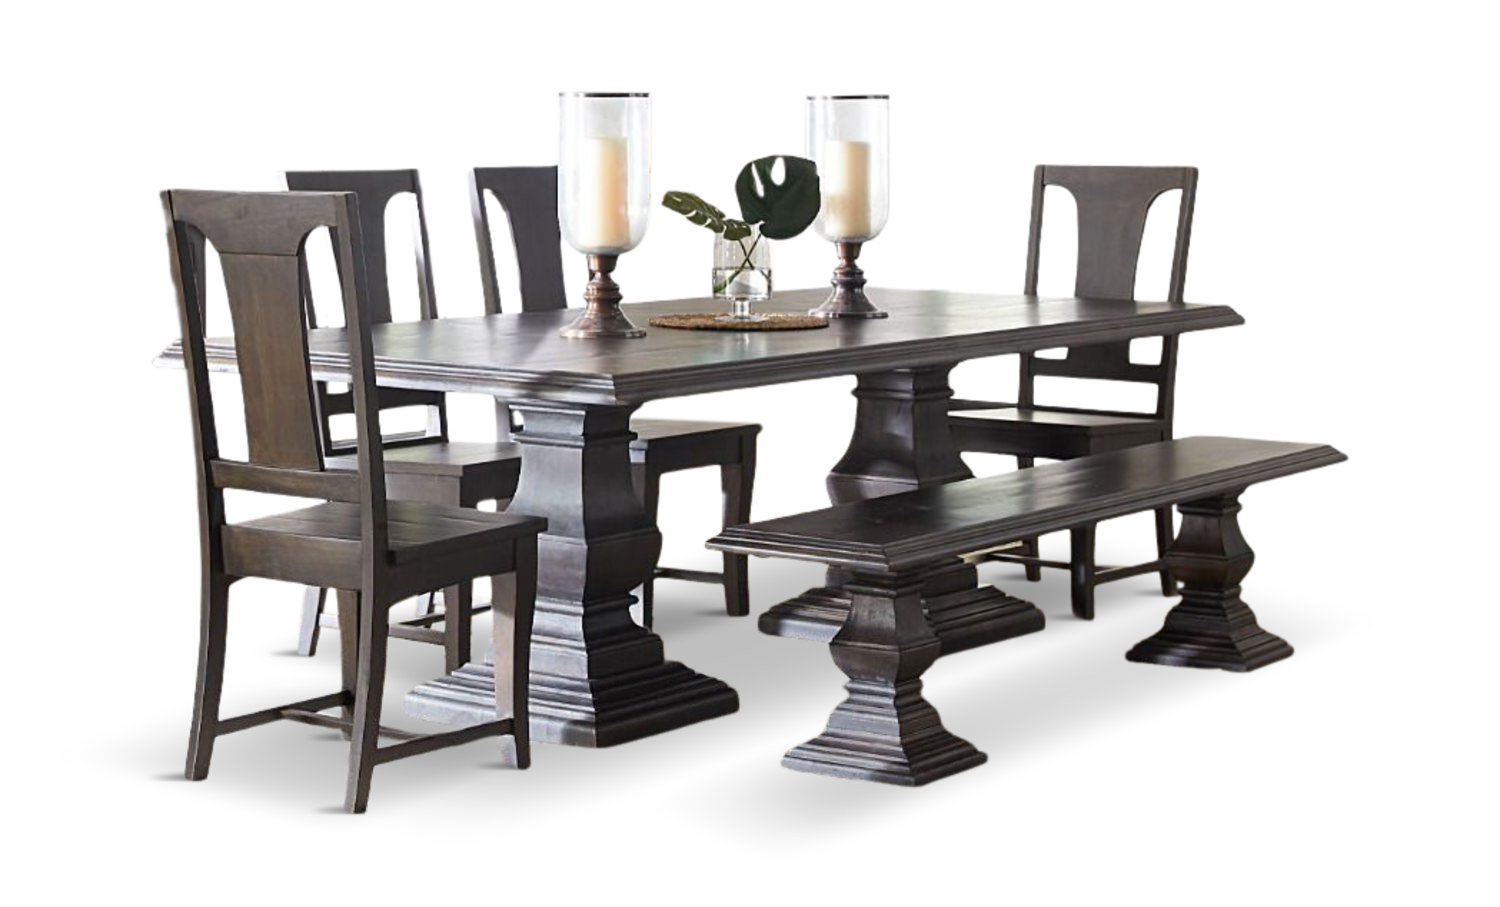 Keys Dining Table With 4 Chairs